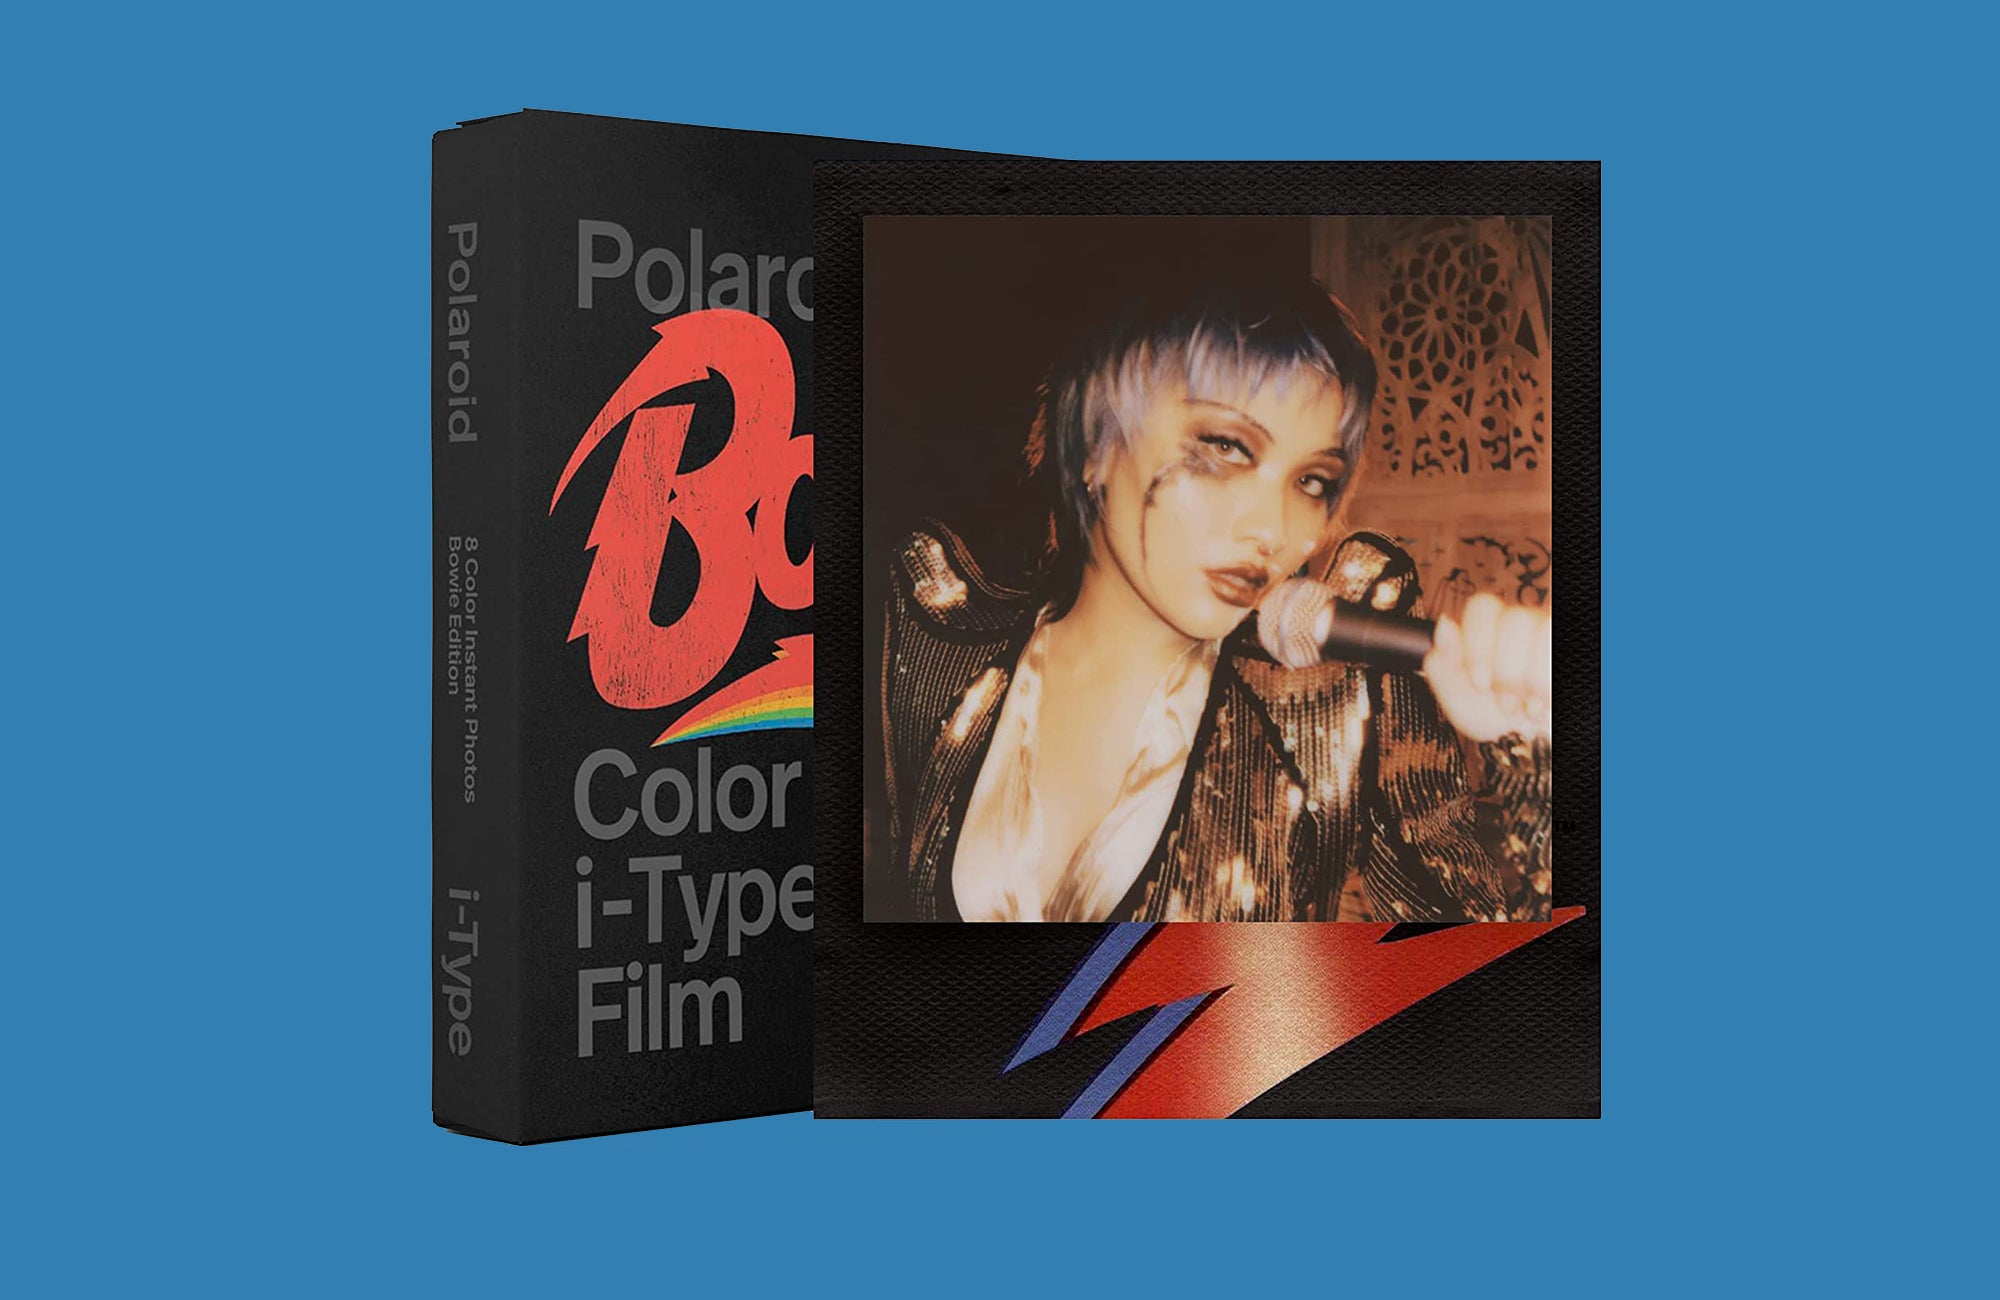 Polaroid's new film is a collab with The David Bowie Archive